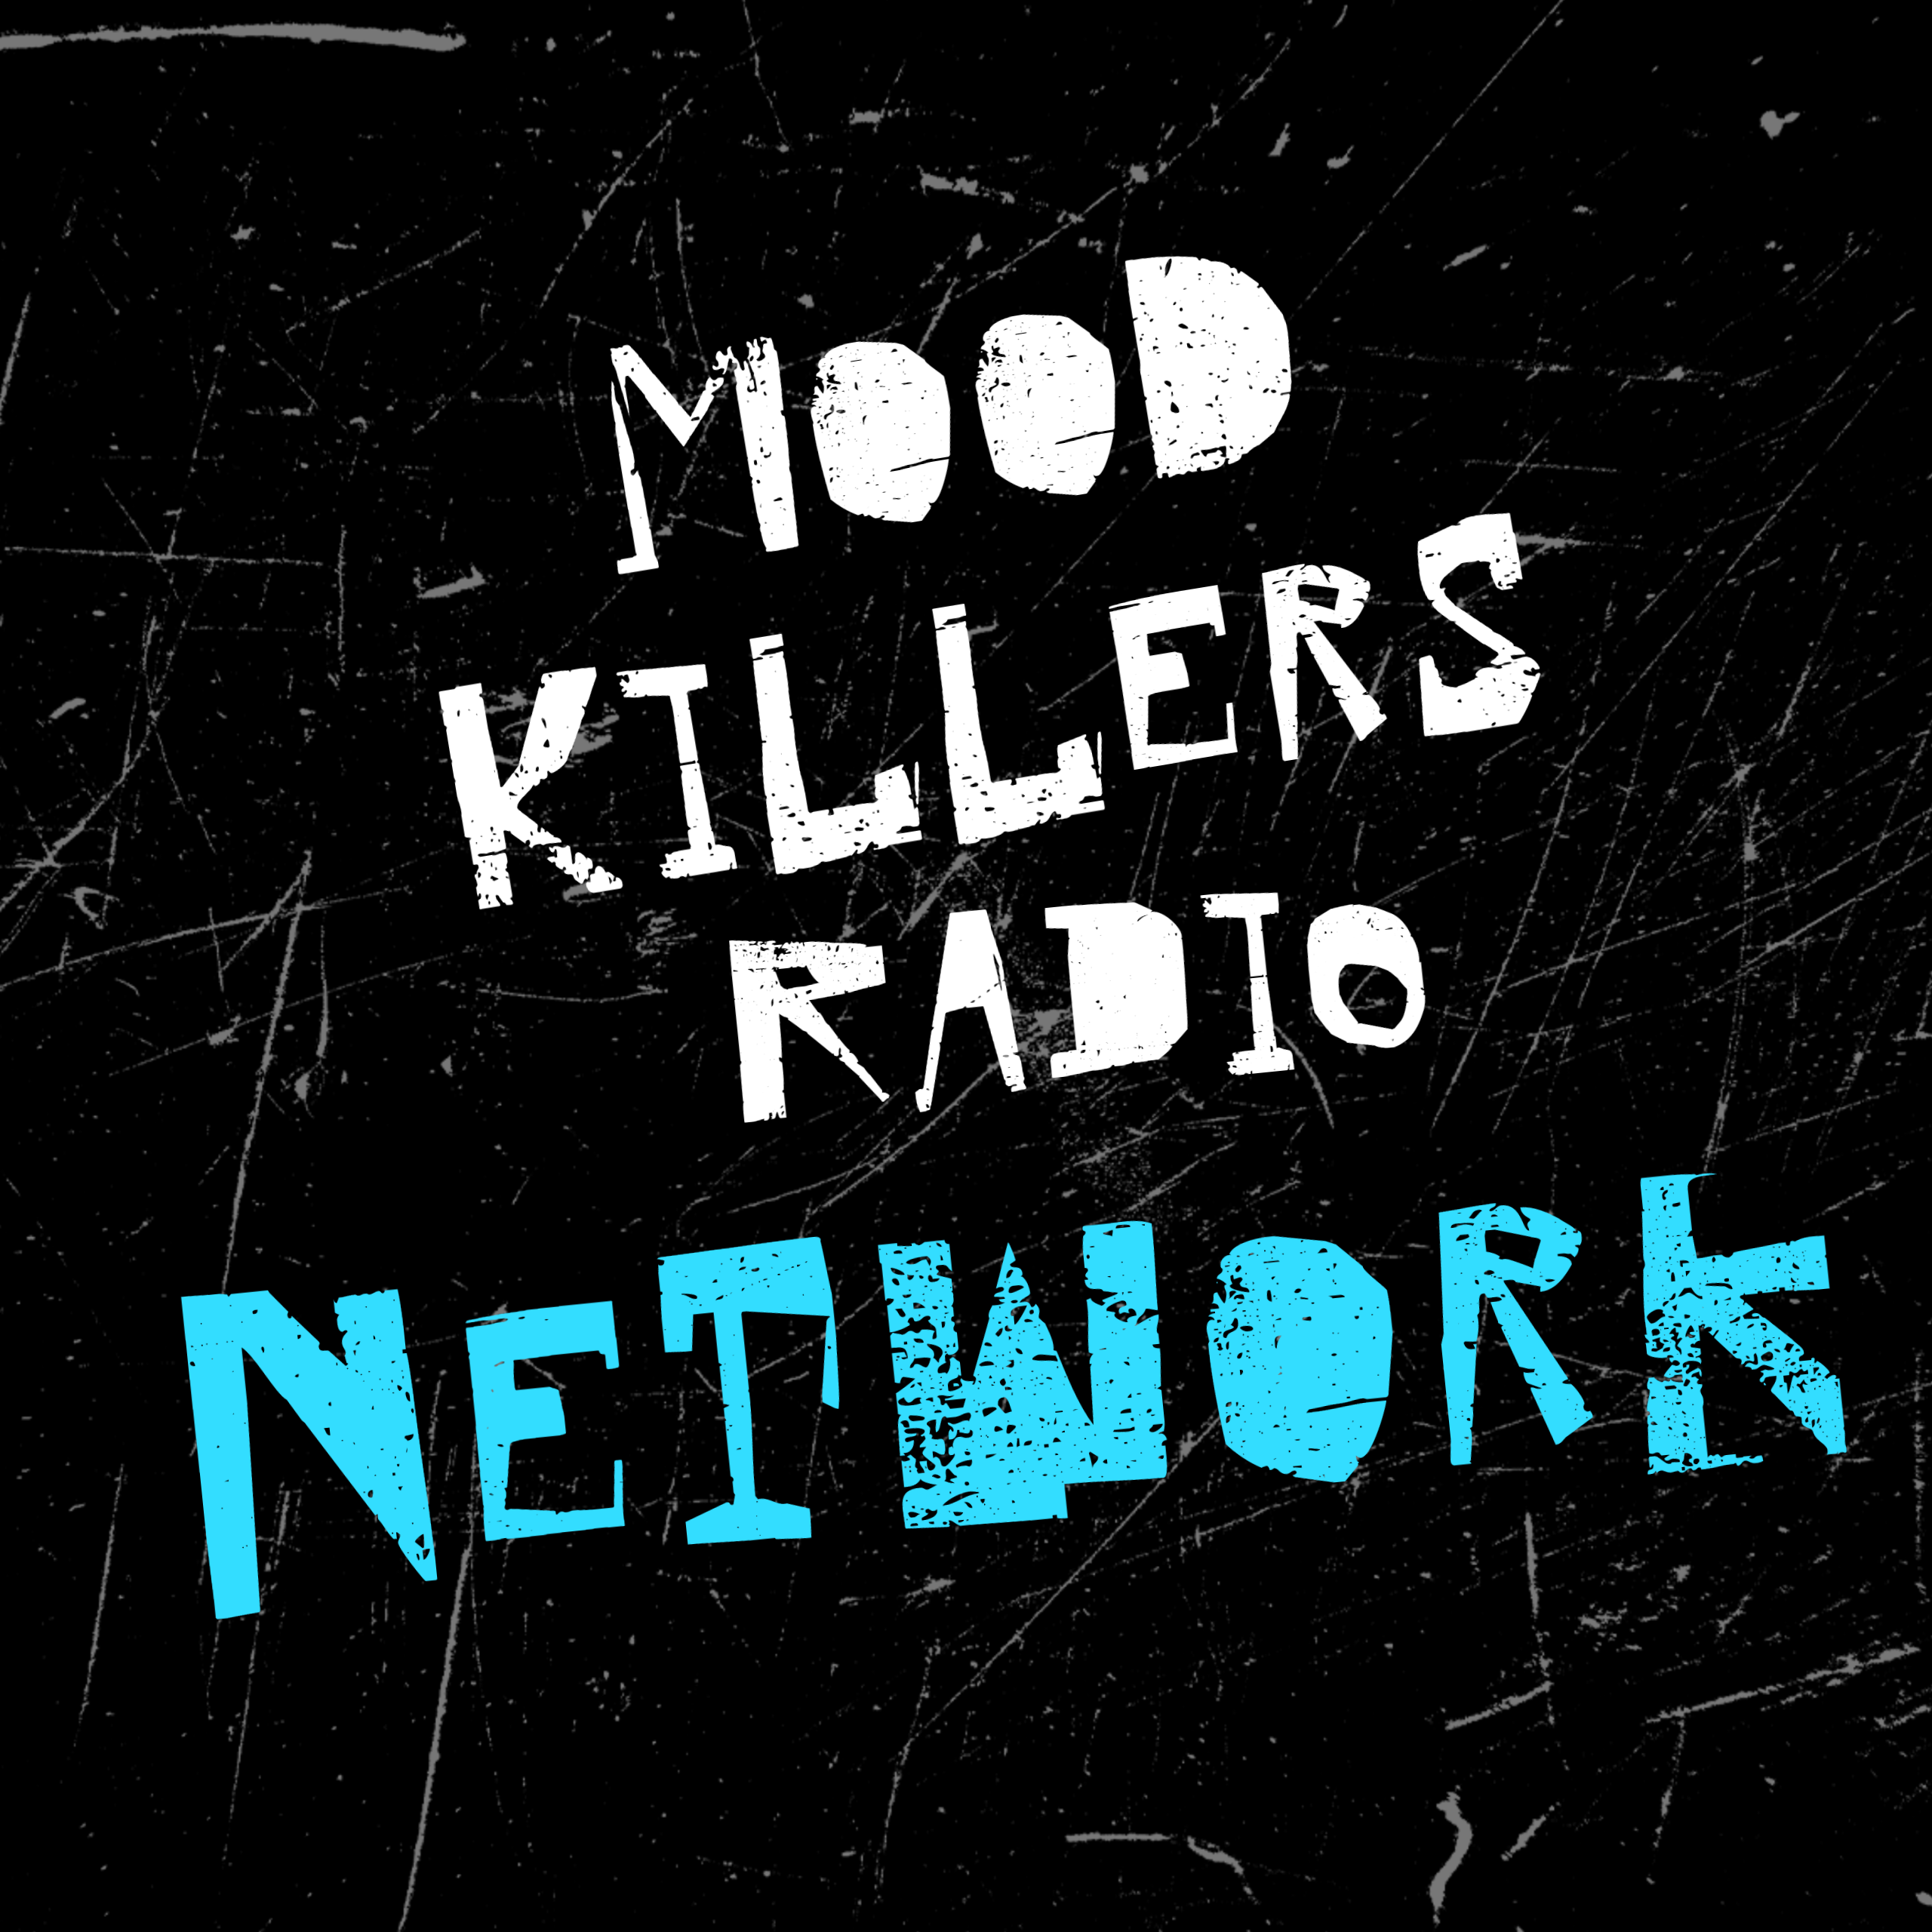 Art for RETURN TO NETWORK by mood killers